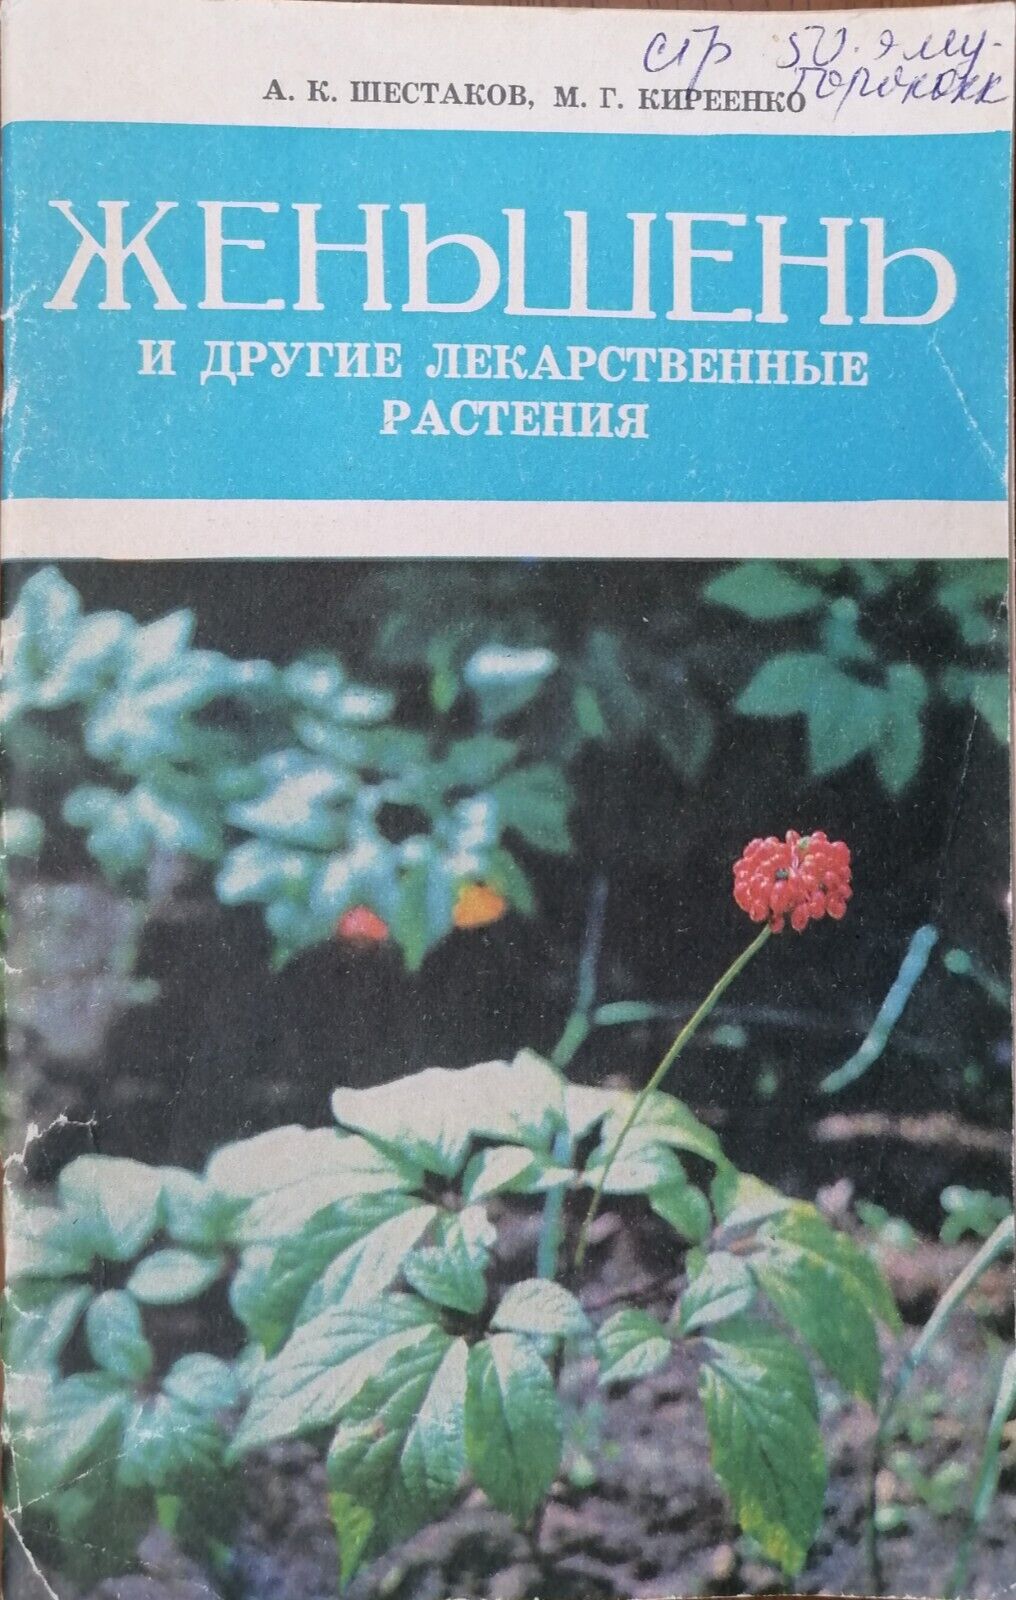 1977 PANAX 'GINSENG' & Healing Plants  ~ЖЕНЬШЕНЬ~ USSR Russian PHYTOTHERAPY Book